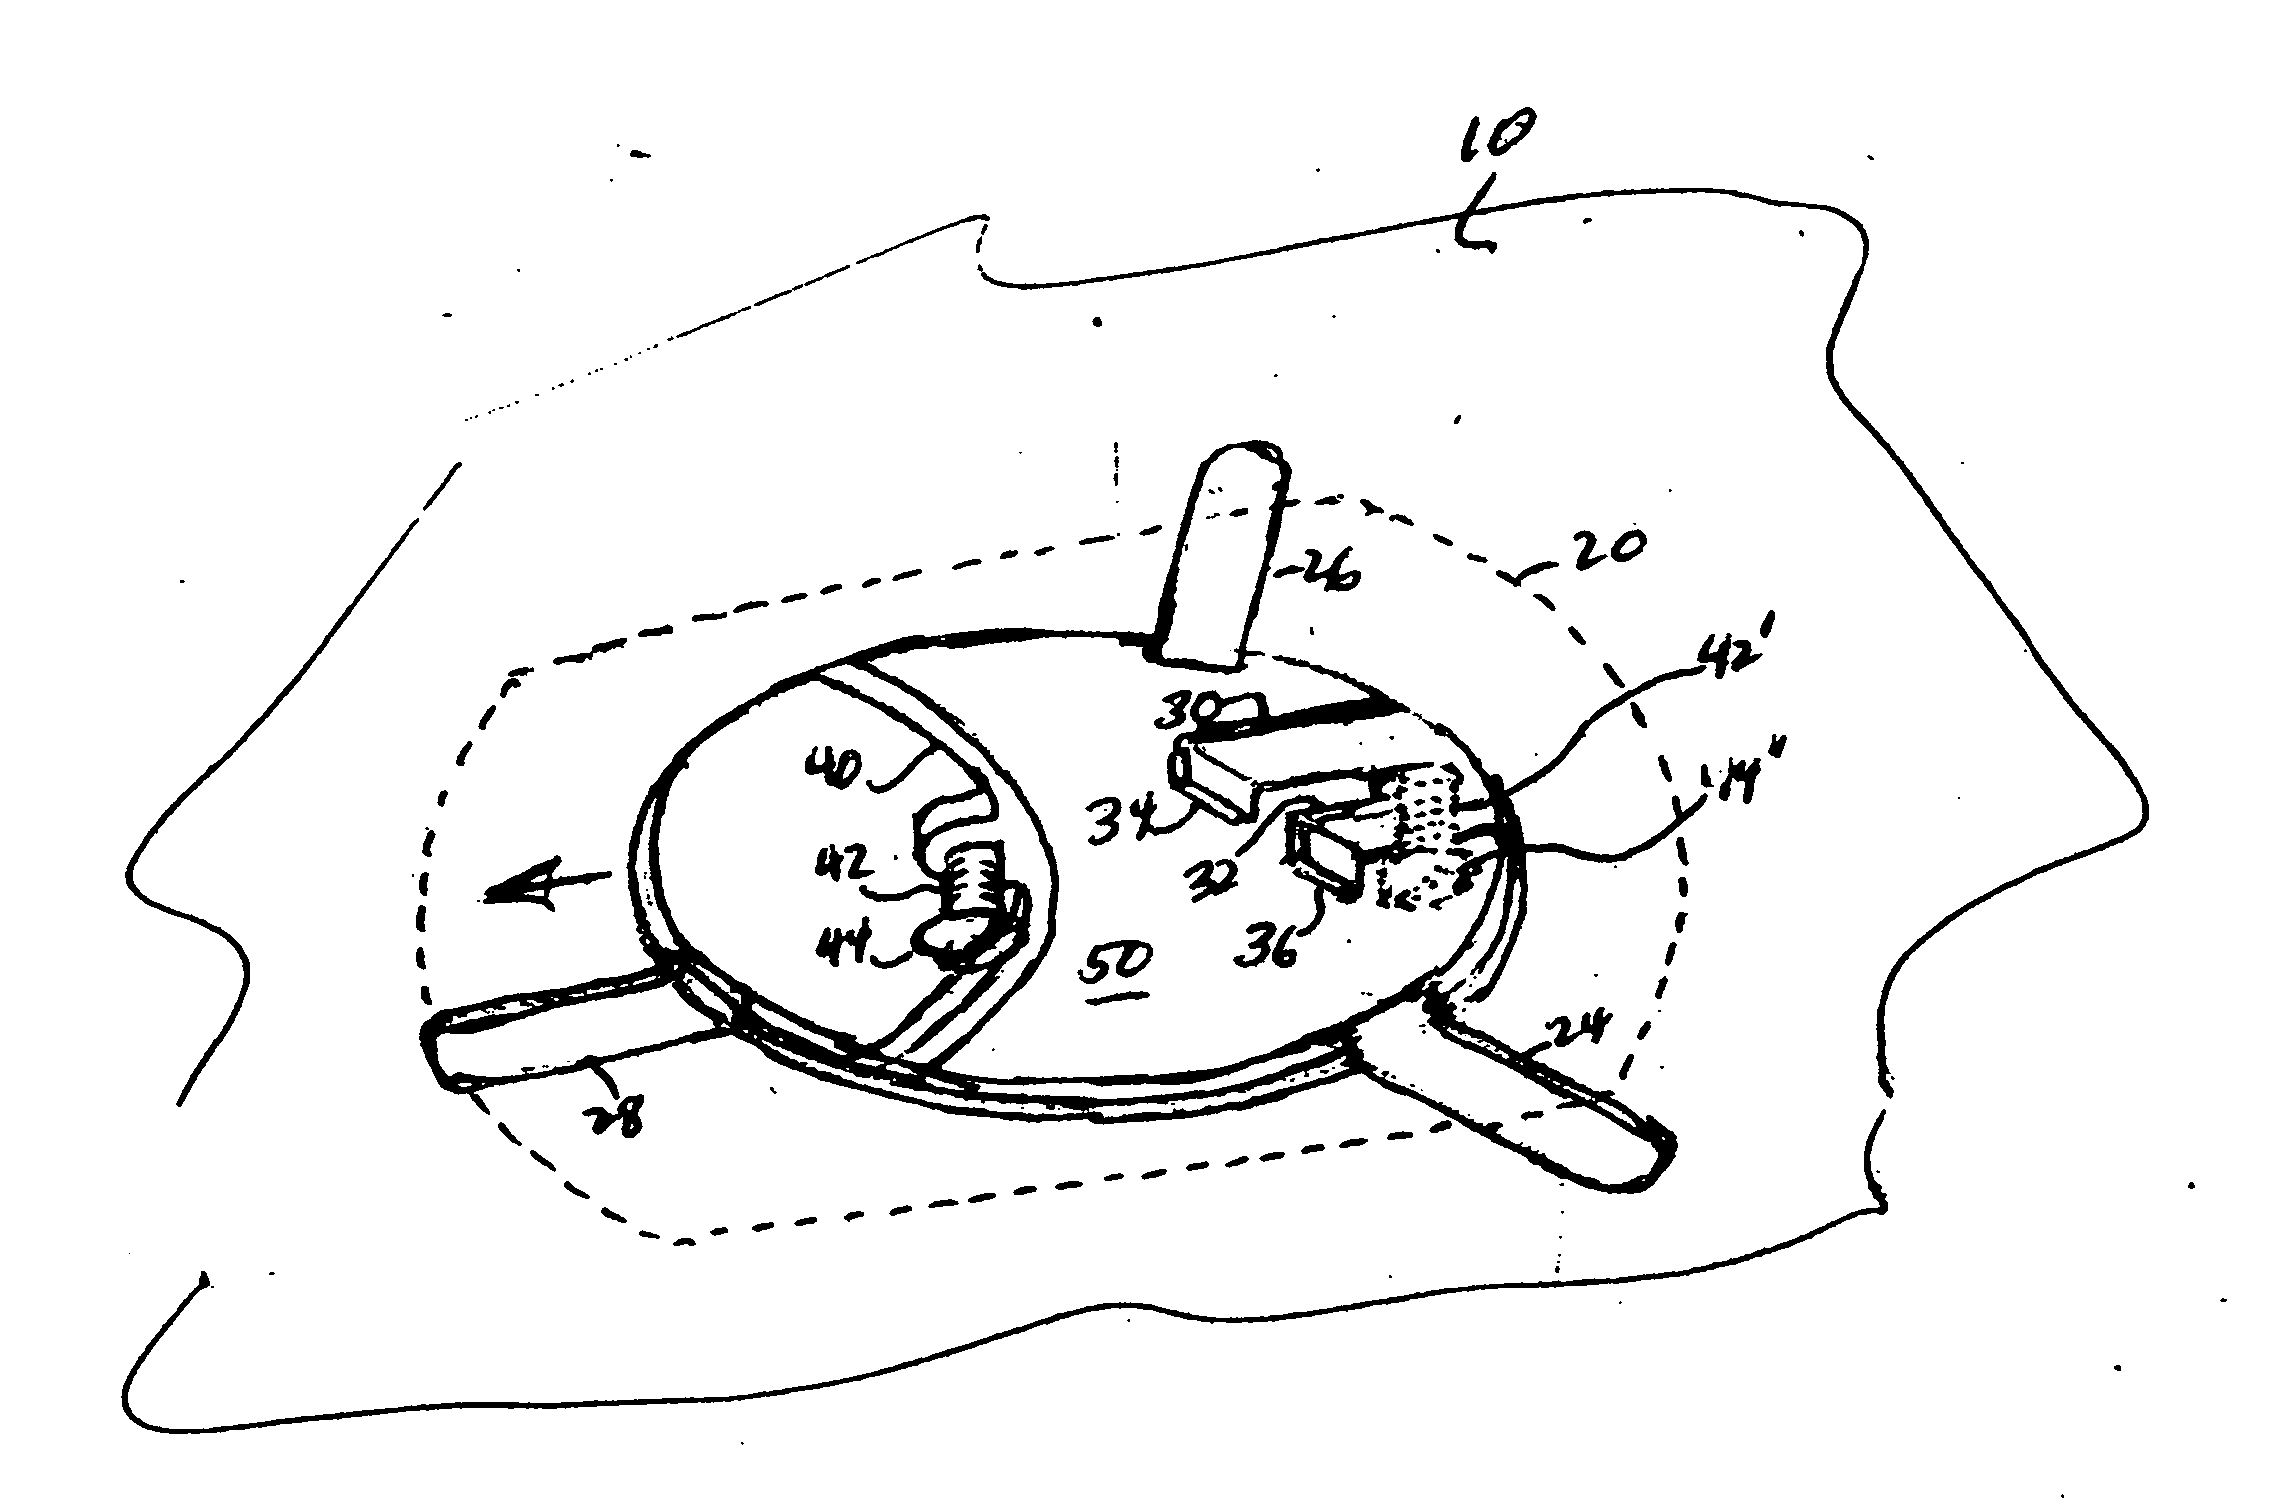 Adapter device for mounting a ceiling electrical light fixture